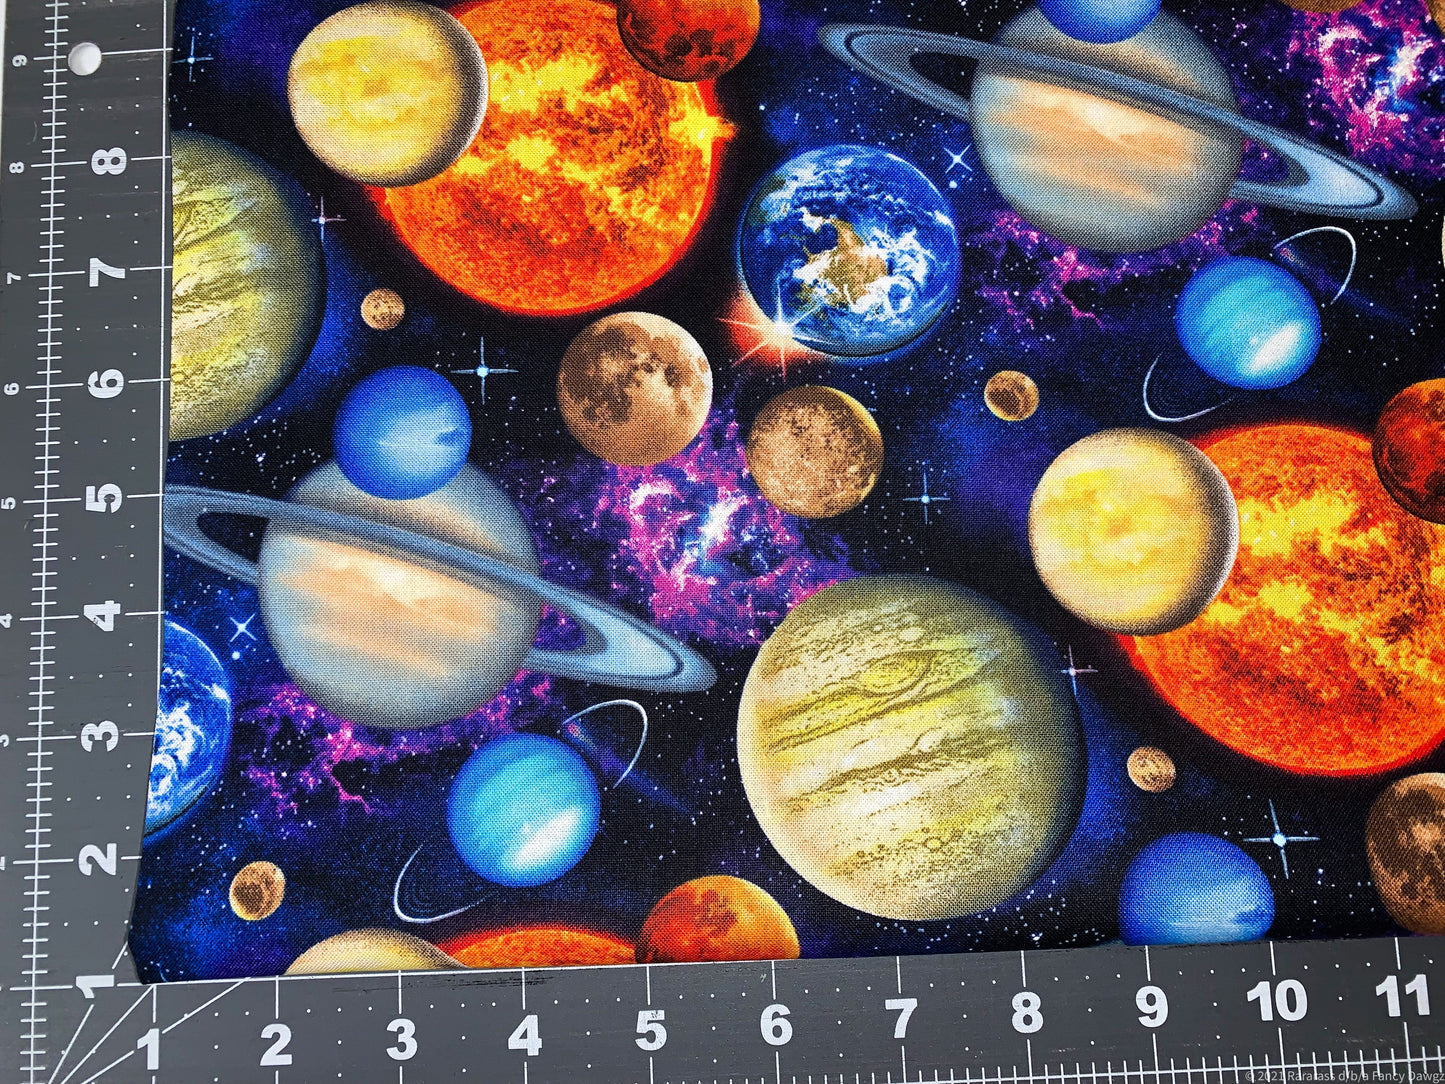 In Space fabric 1331 Planets fabric, Earth Sun Moon